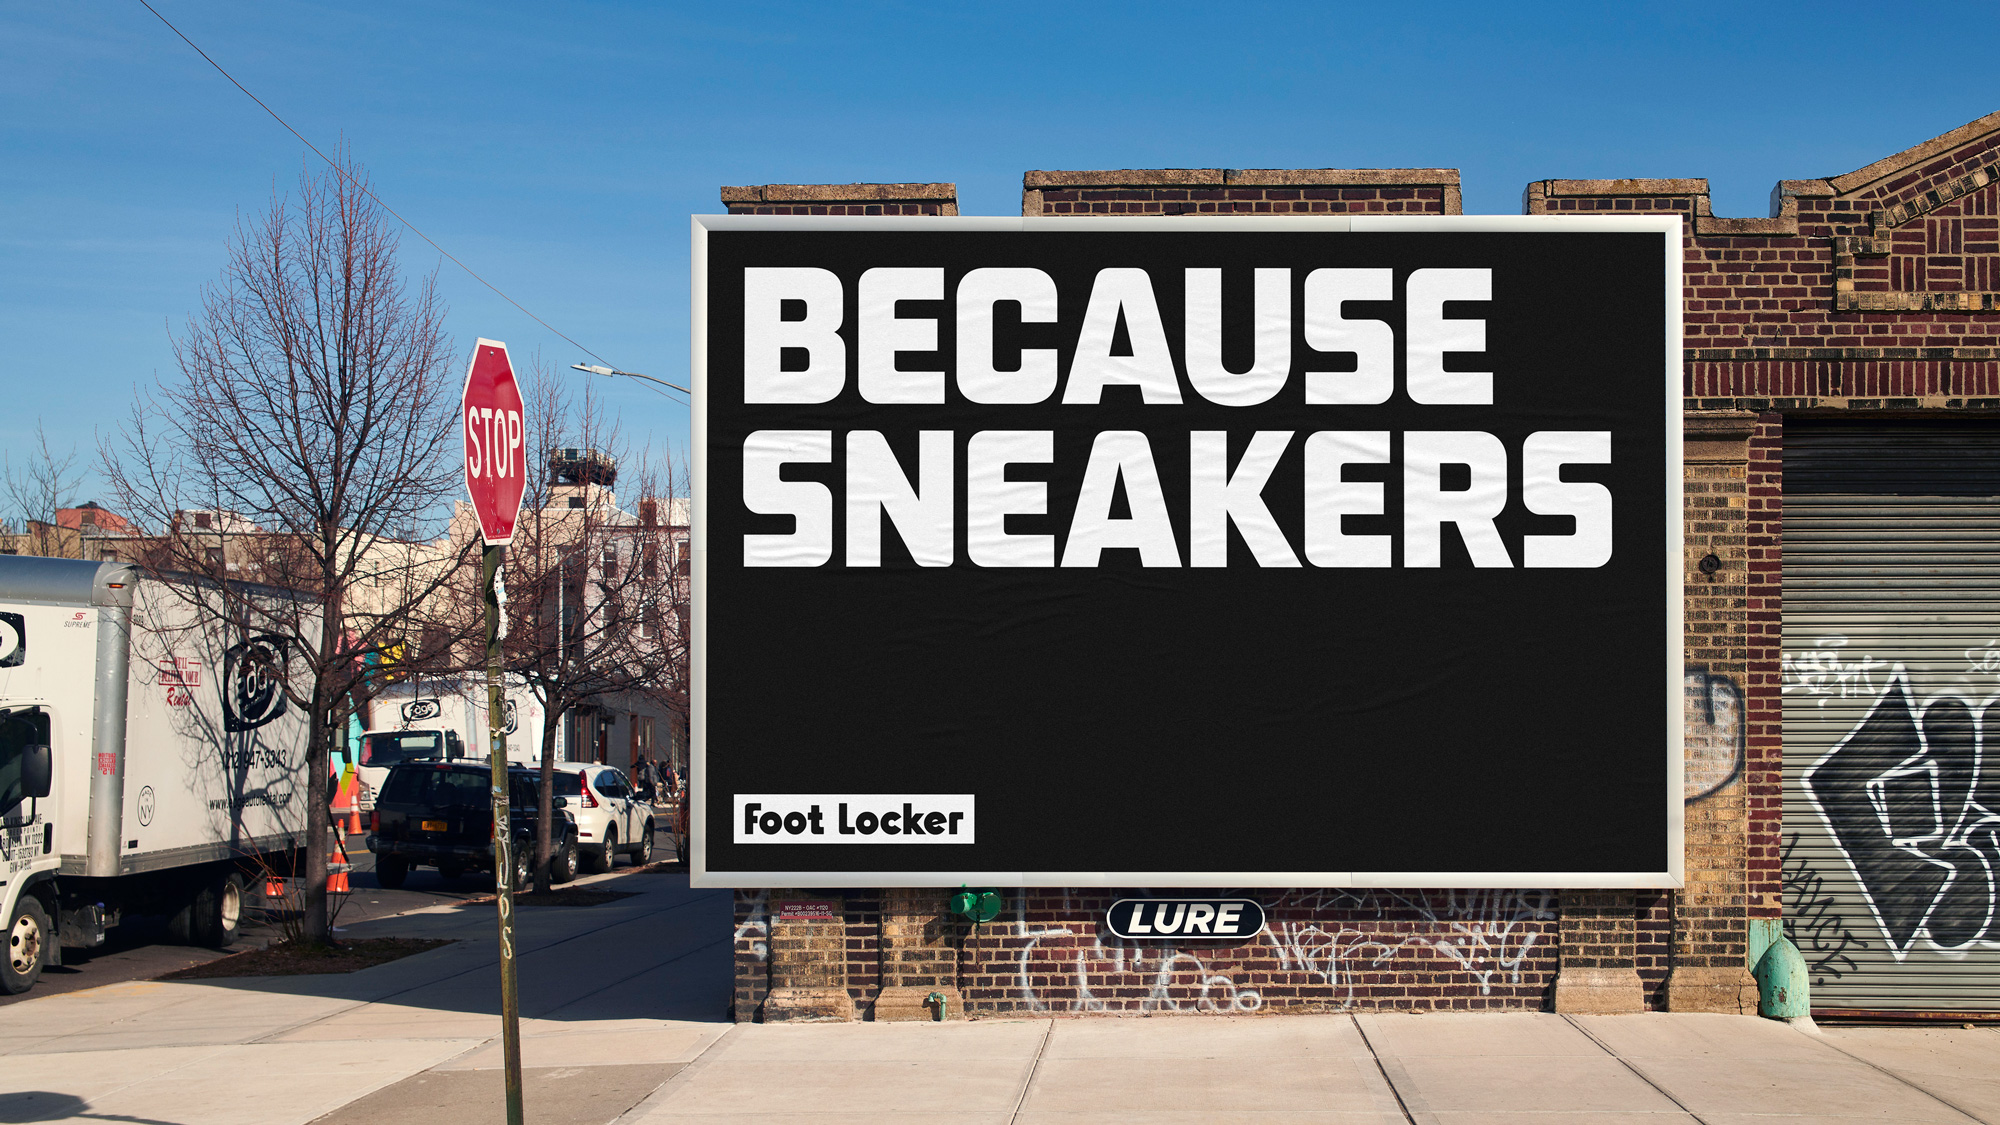 New Logo and Identity for Foot Locker by Jones Knowles Ritchie